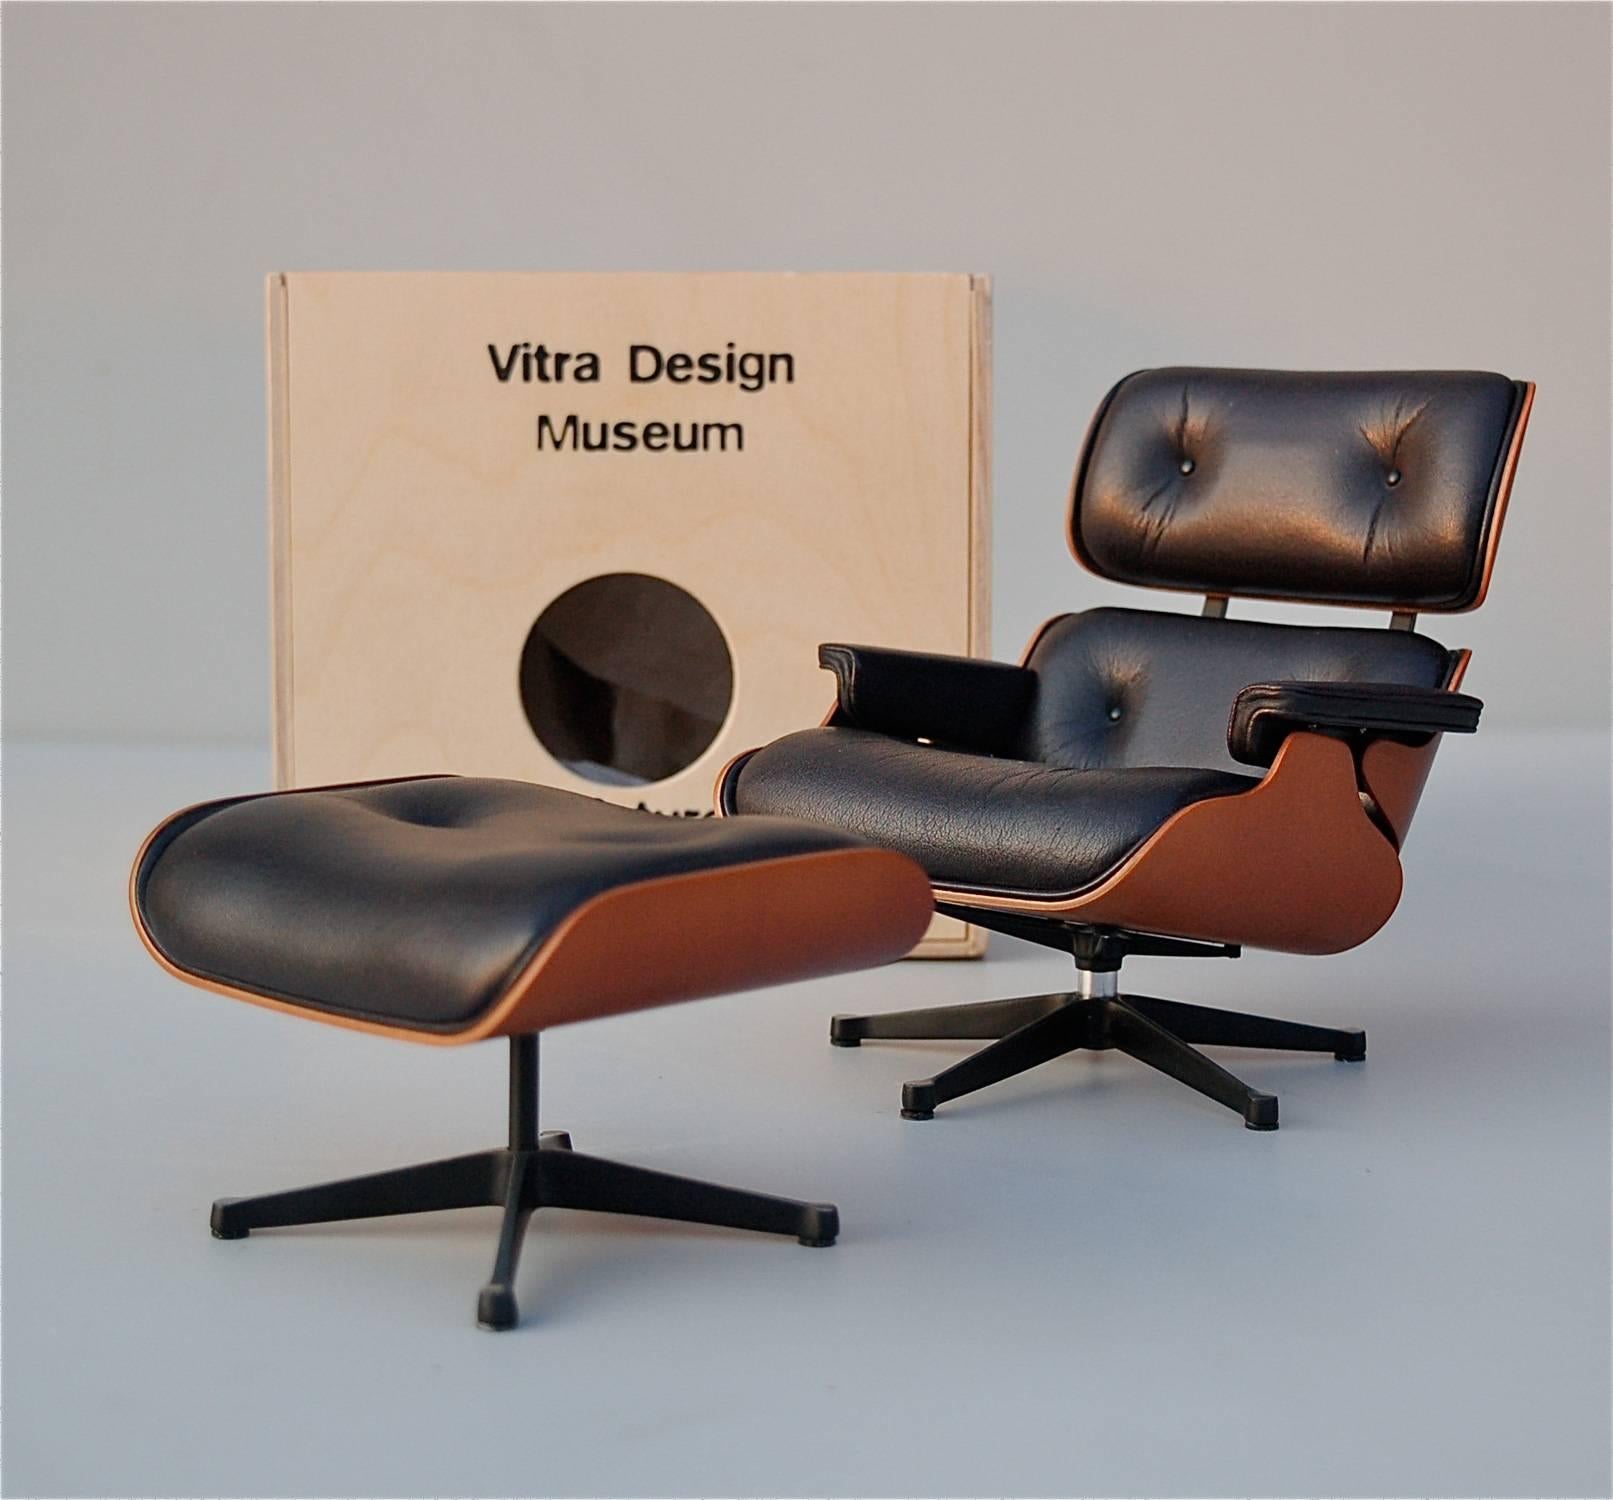 The lounge chair is one of the best known creations of Charles and Ray Eames. Created in 1956, it has become a Classic in modern furniture history. Exactly one sixth of the size of the historical original, the chair and ottoman are true to scale and